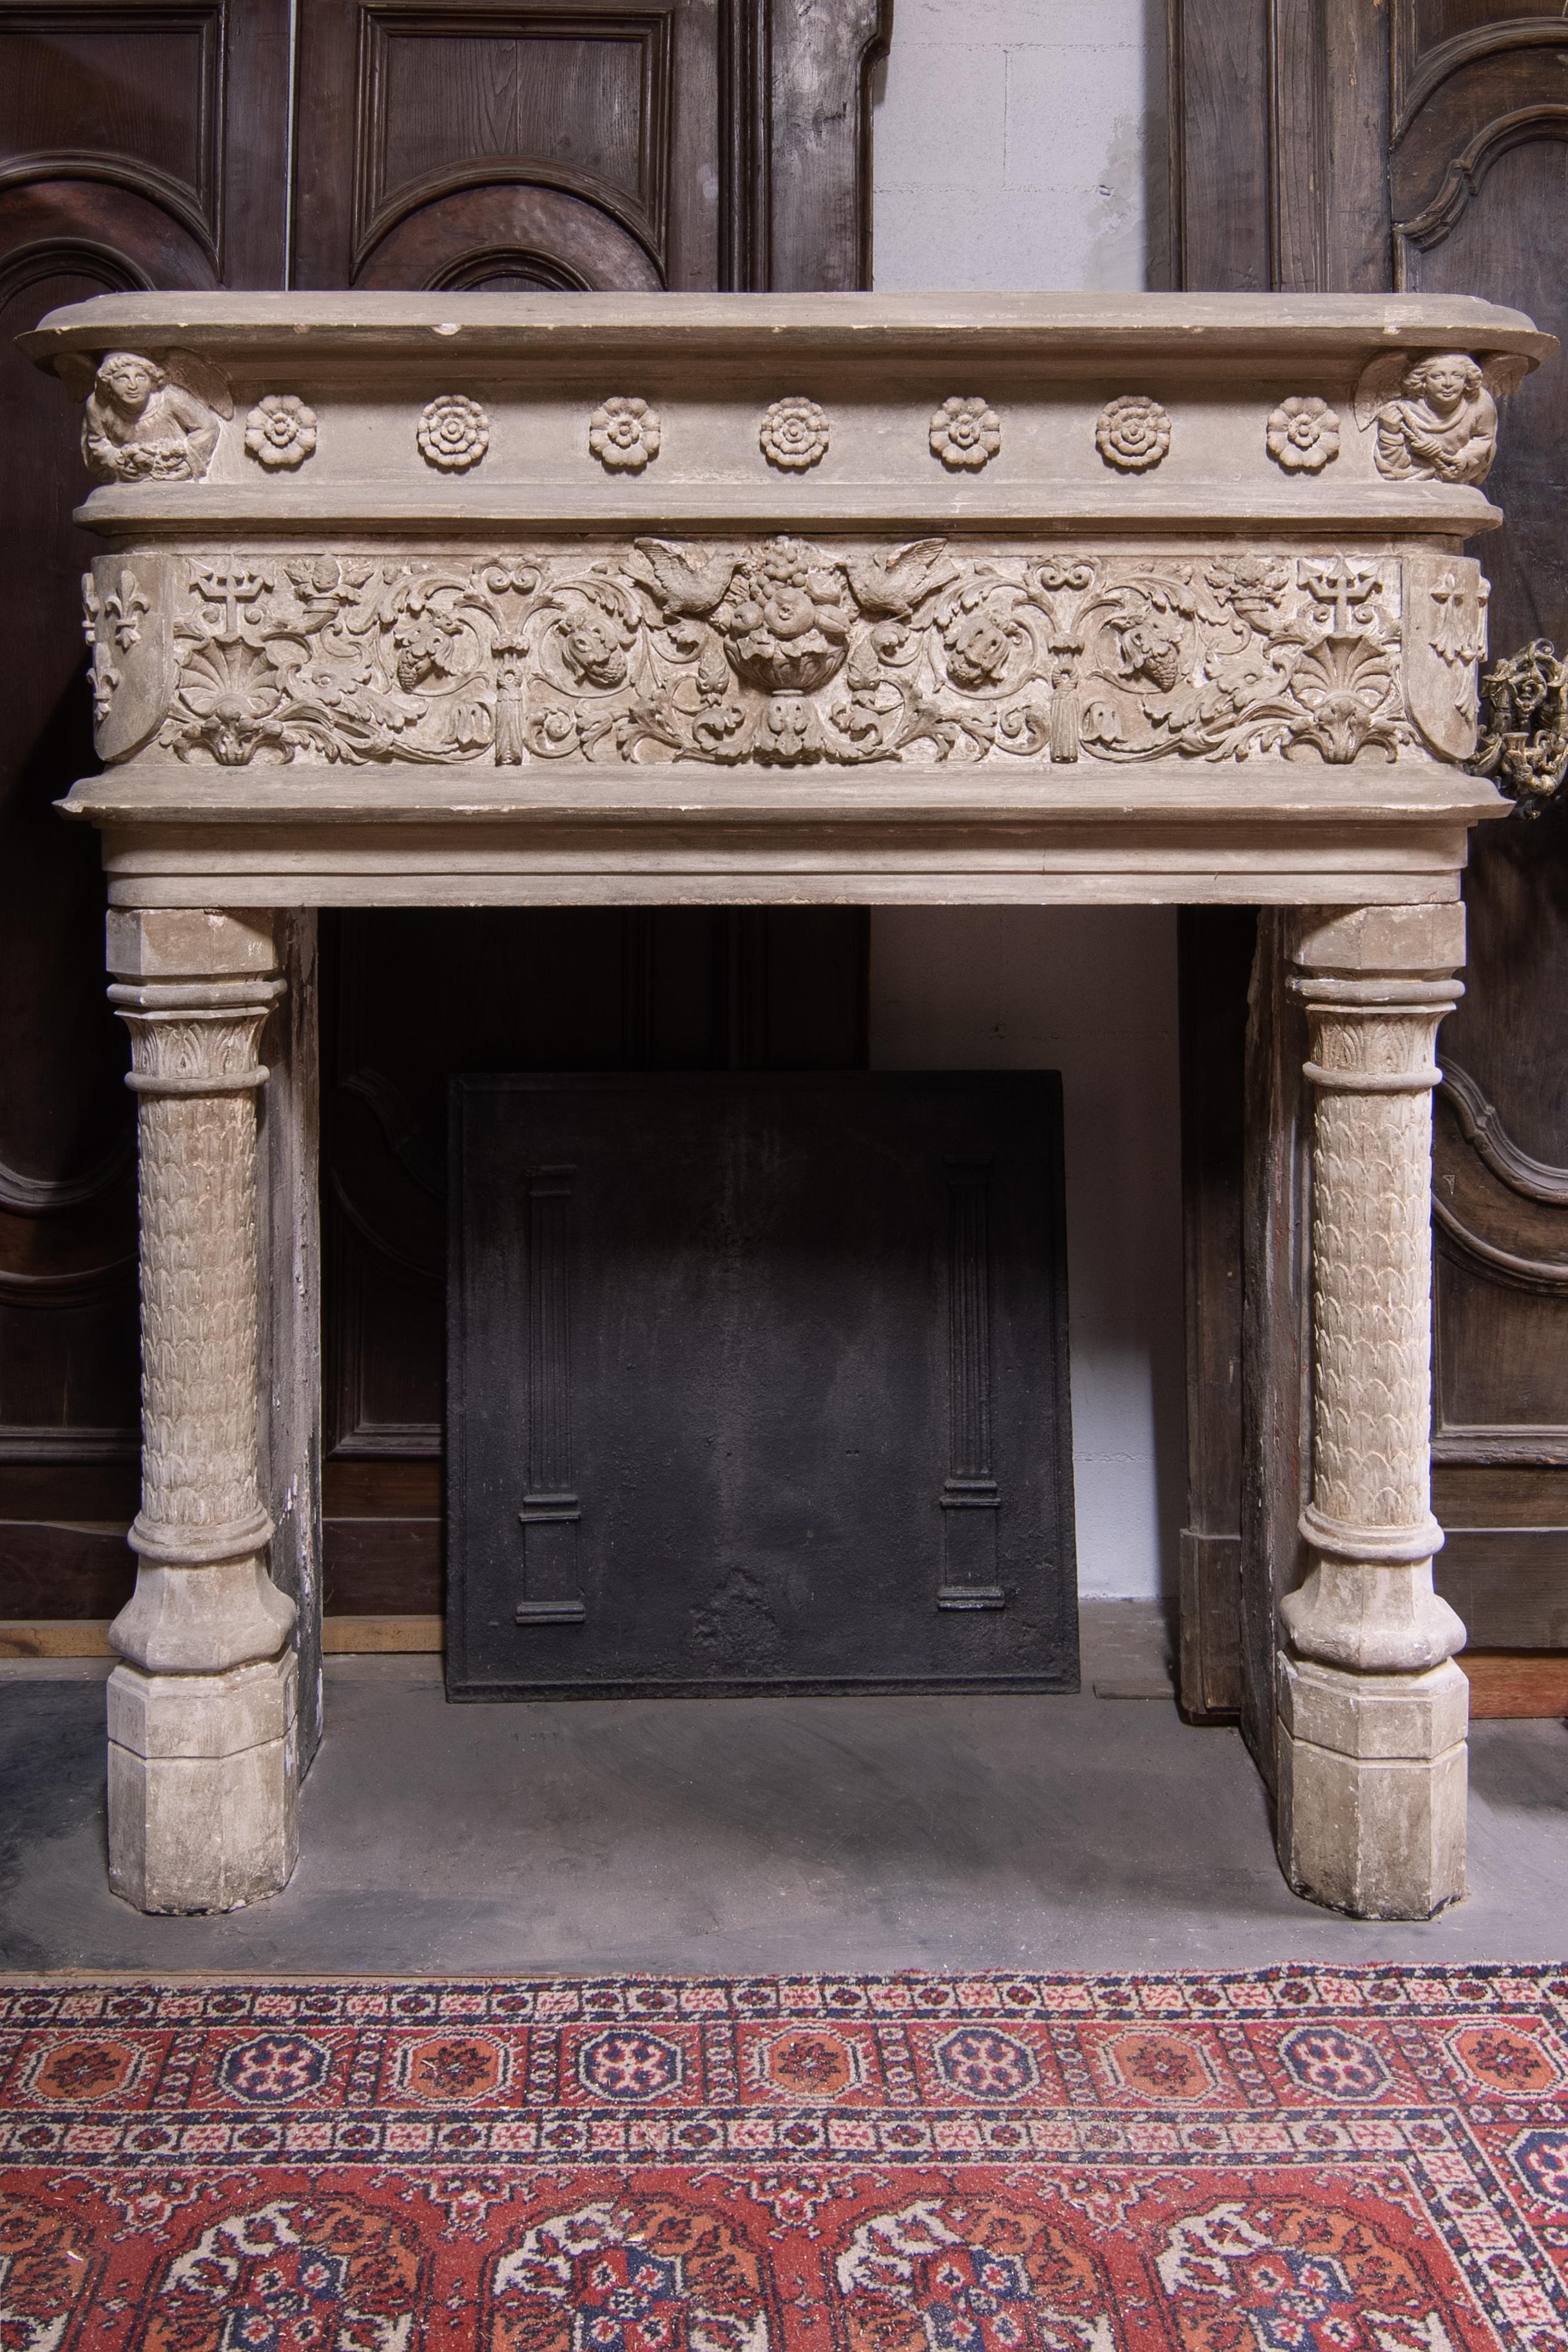 Antique fireplace in gray stone, hand carved with various figures of birds, flowers and putti, very rich in decorations, with shields and lilies in the corners, it comes from an ancient castle in Italy in the 1800s.
Suitable to be positioned at the